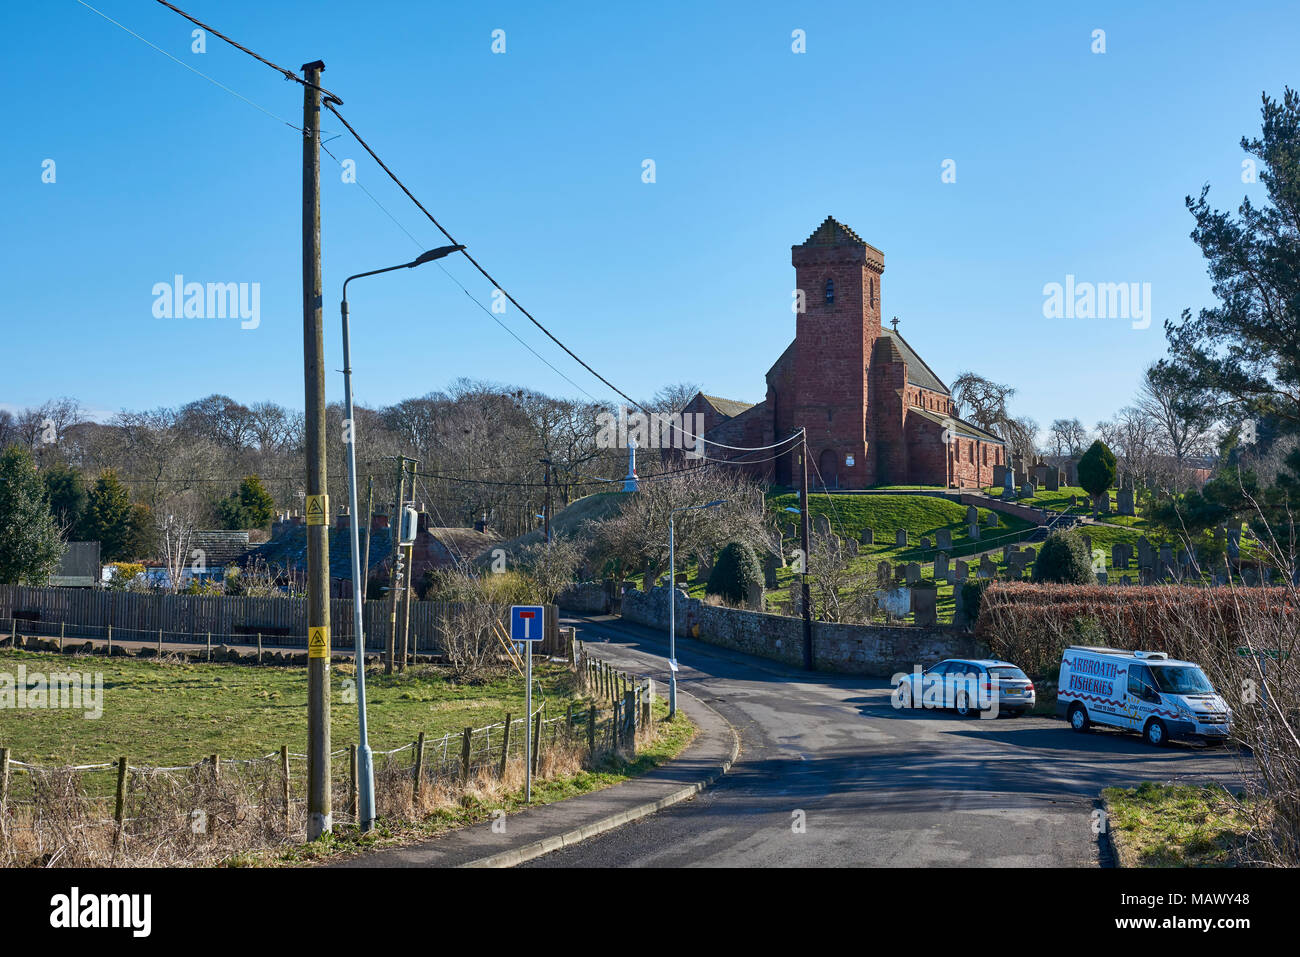 Looking from the Single Road heading into the Small Village of St Vigeans in Angus, Scotland, with its Parish Church overlooking the Area. Stock Photo